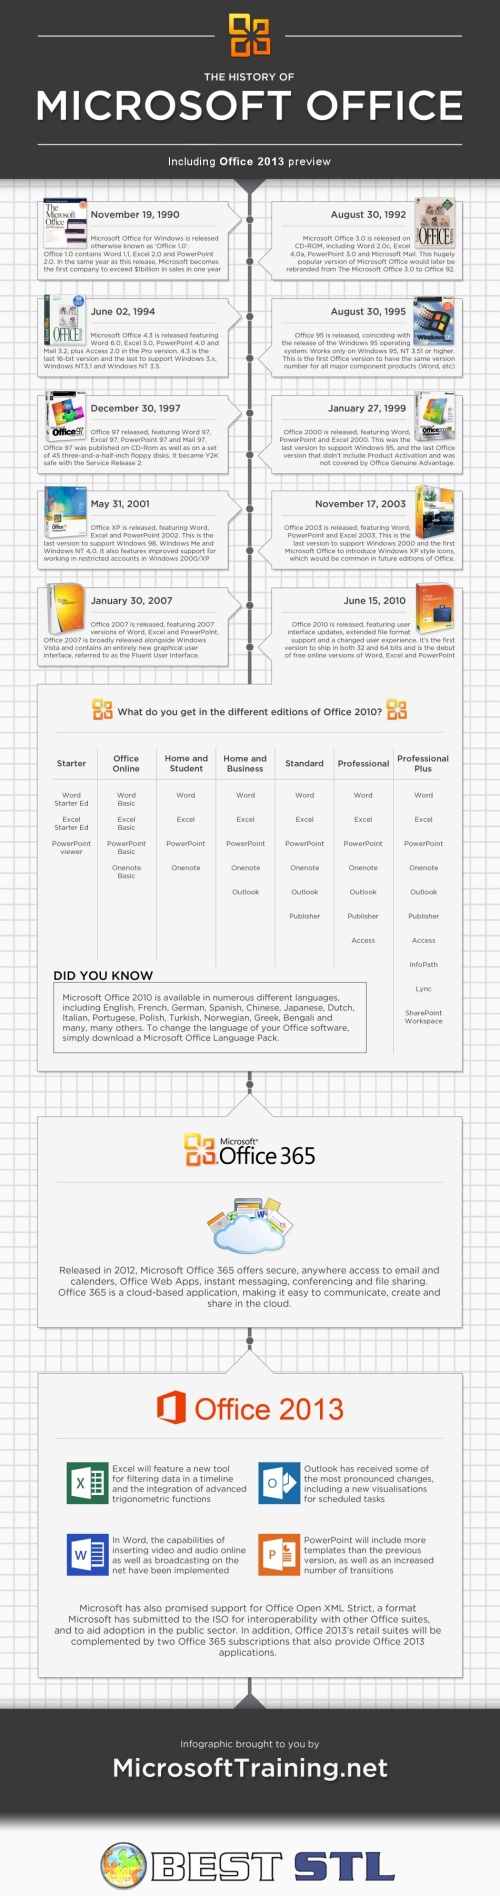 The History of Microsoft Office infographic